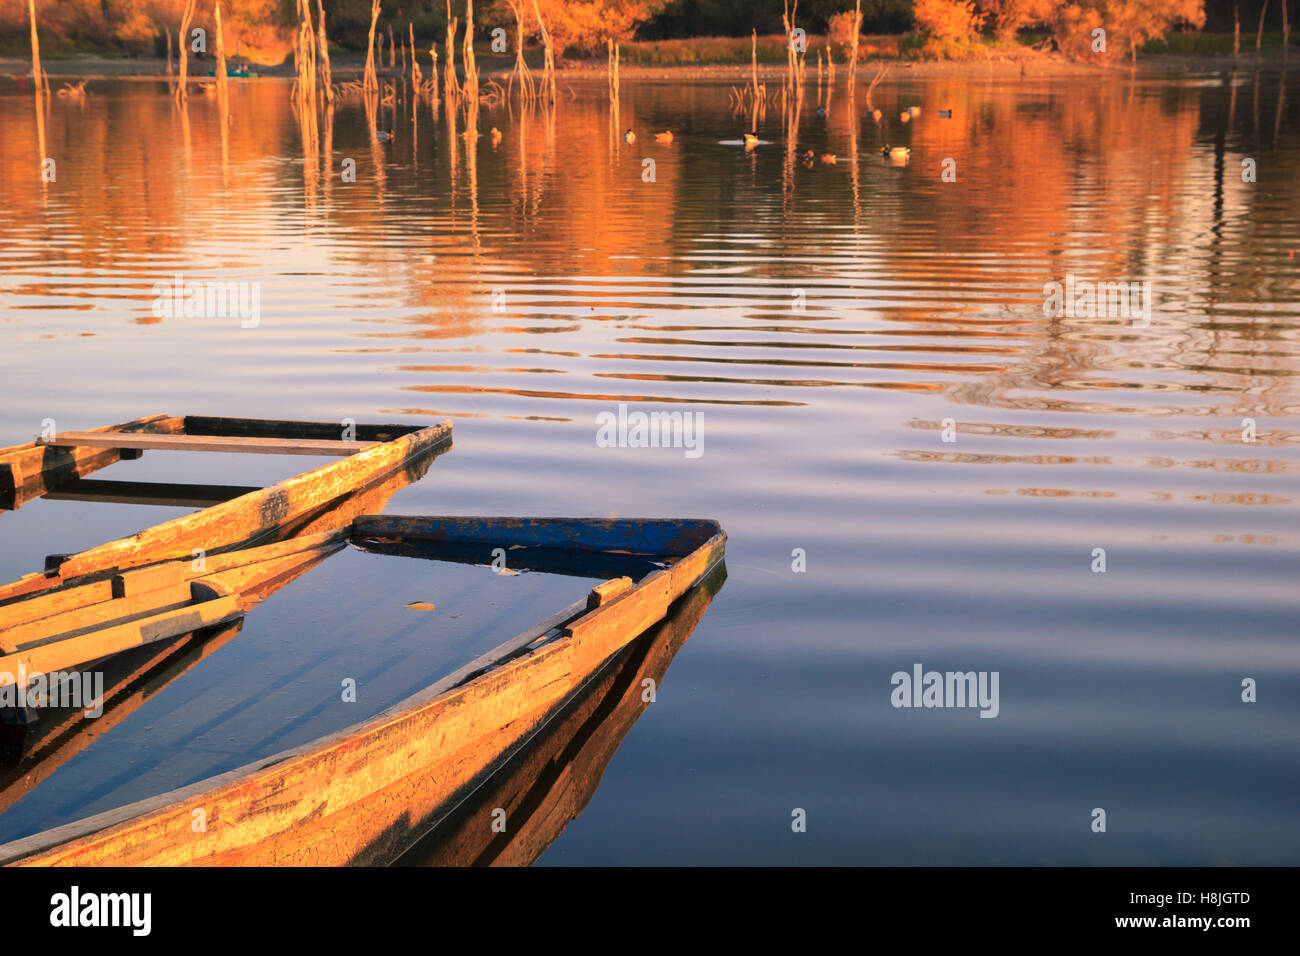 Wooden fishing boats at sunset on river or lake Stock Photo